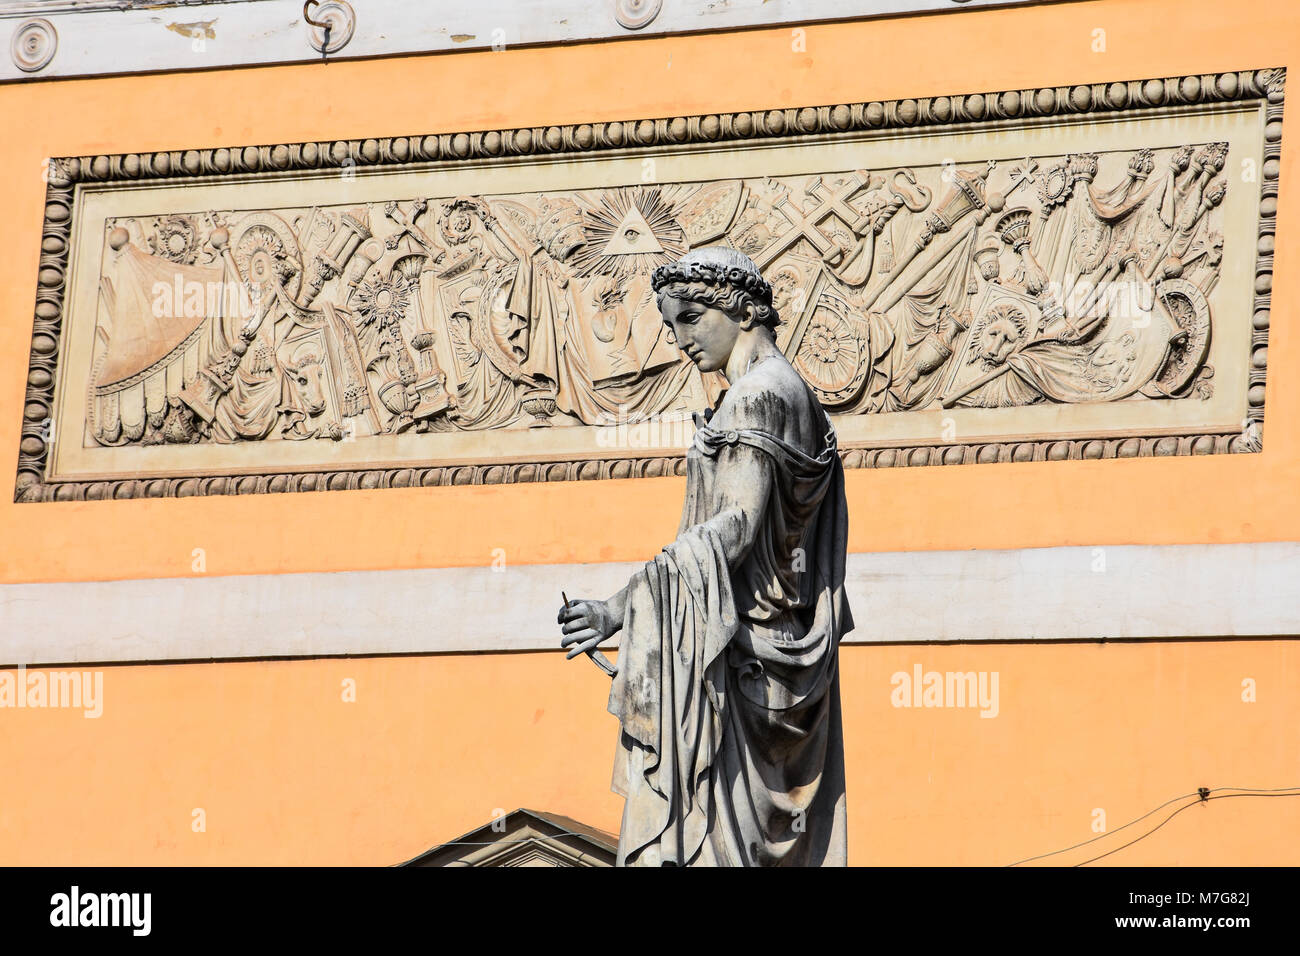 Sculpture at the Piazza del Popolo (People's Square). Rome, Italy Stock Photo